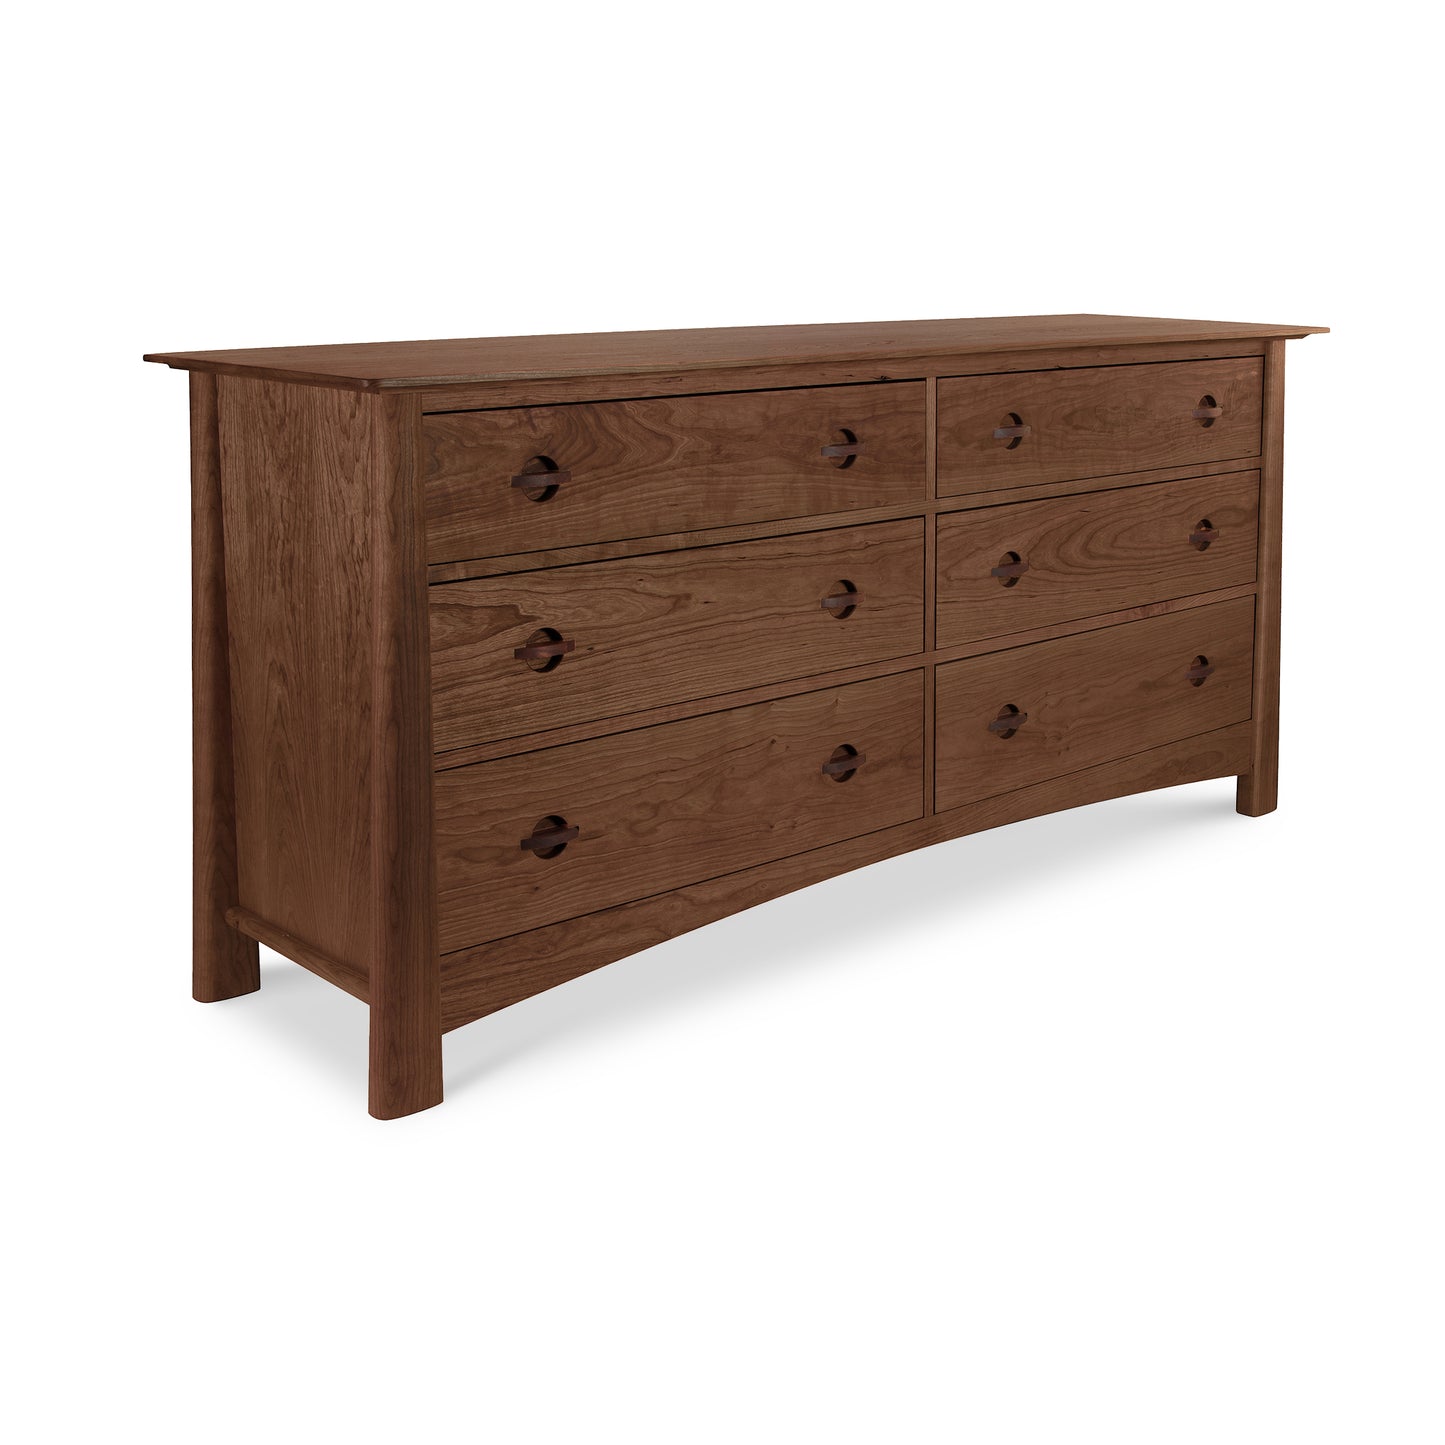 A handmade Cherry Moon 6-Drawer Dresser crafted from sustainably harvested wood by Maple Corner Woodworks, with nine drawers, featuring a tapered design and round knobs, isolated on a white background.